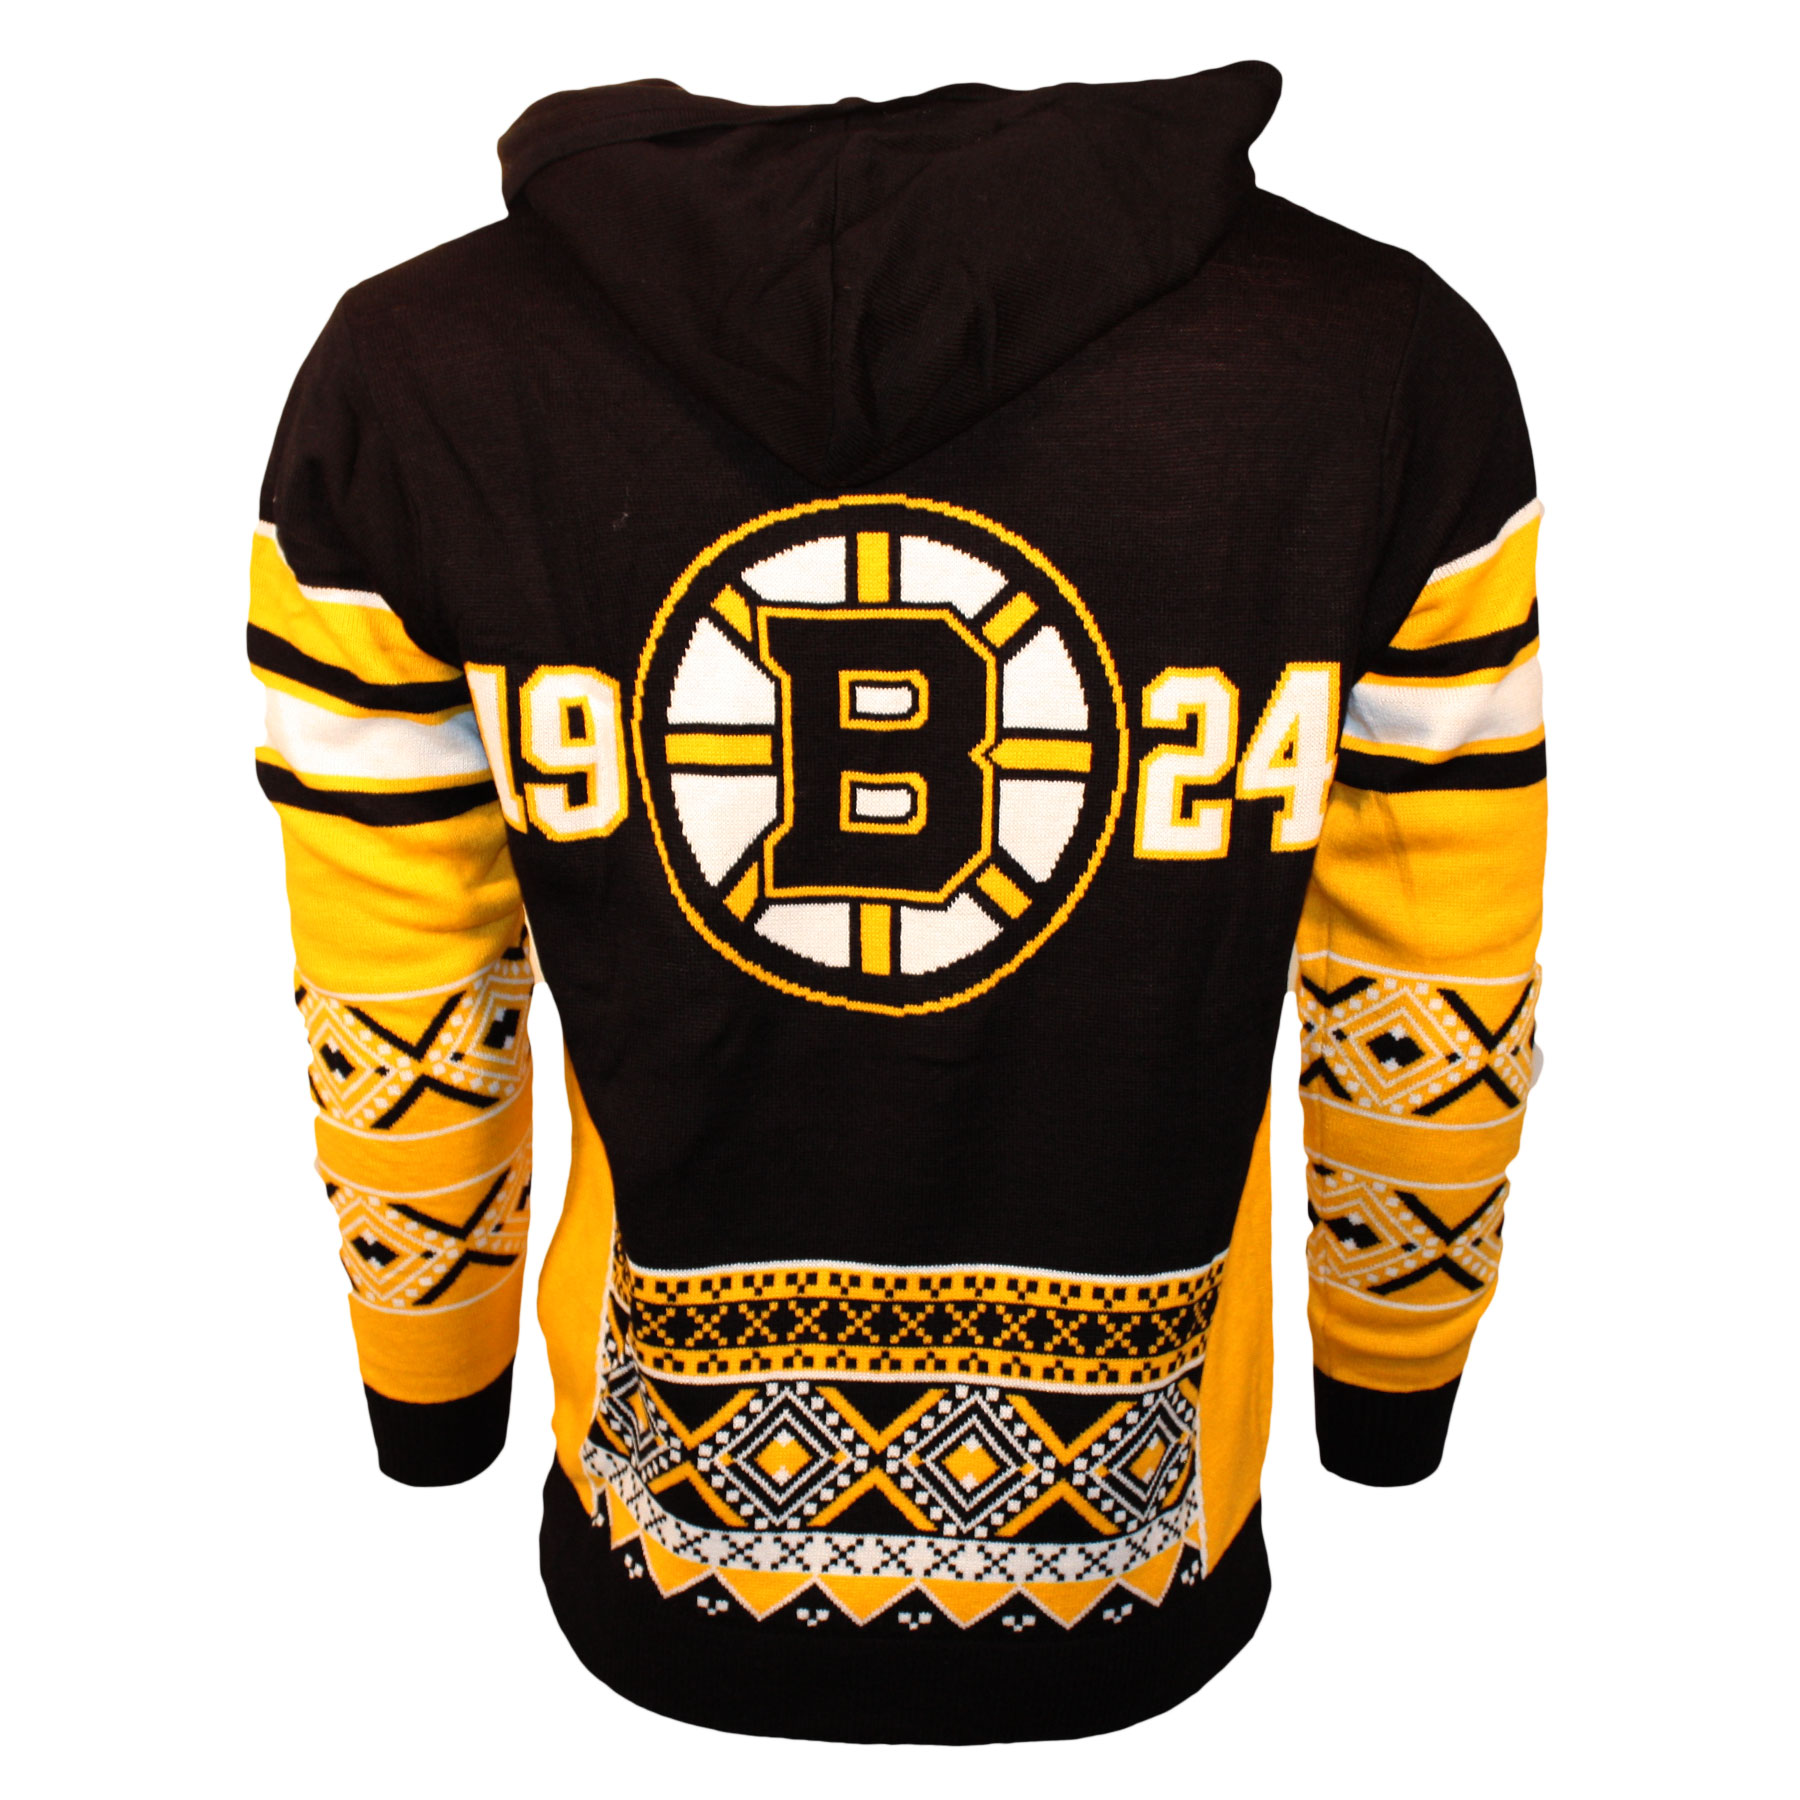 Boston Bruins Nhl Big Logo Ugly Pullover Hoodie Holiday Sweater